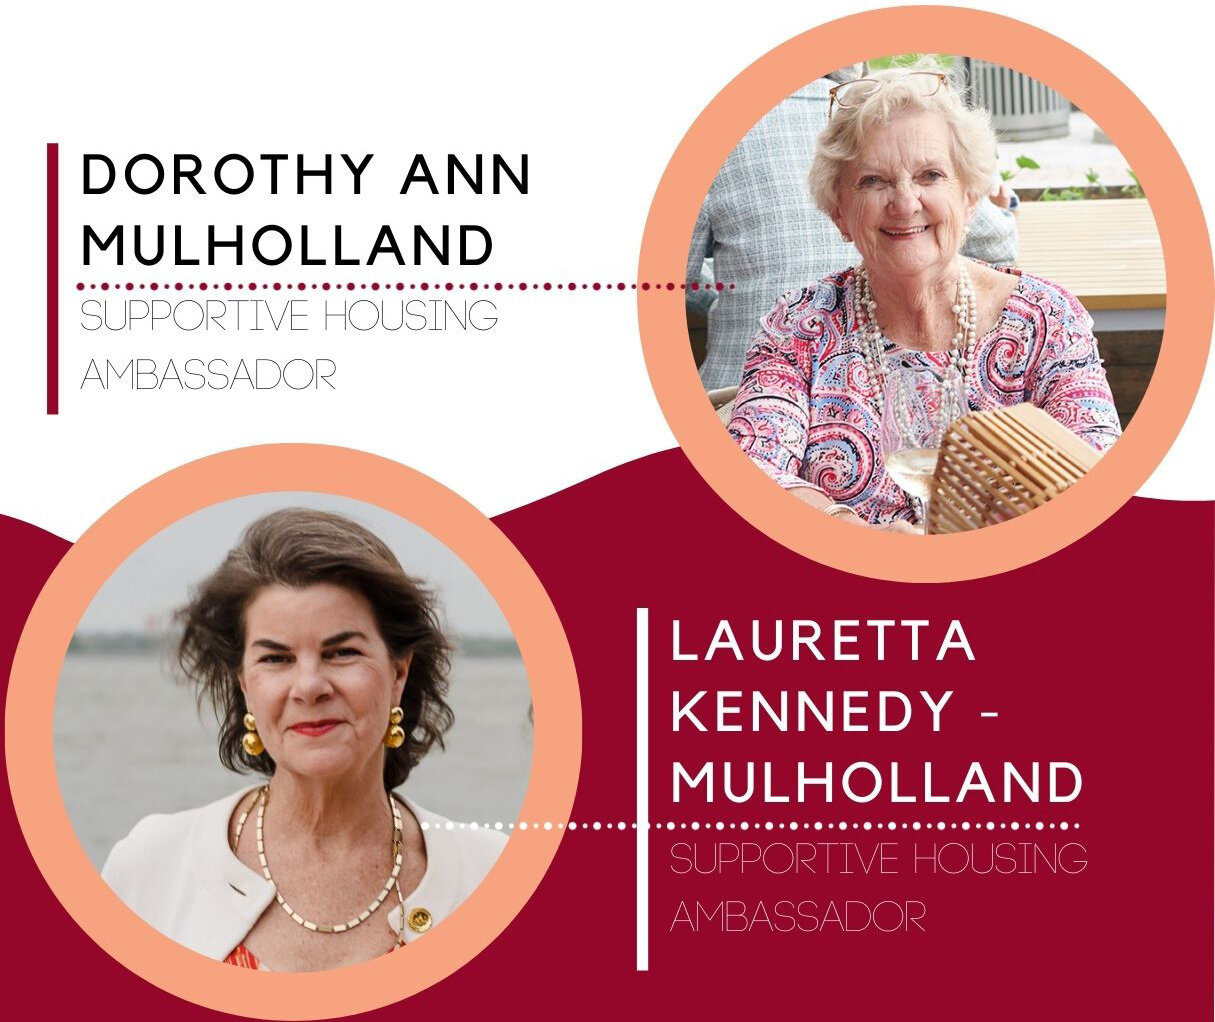 Meet the Honorees:  Dorothy Ann Mulholland and Lauretta Kennedy-Mulholland, Ambassadors for the Supportive Housing Programs.

Dorothy Ann Mulholland has been a crucial part of Providence House for over four decades when her husband, Joe Mulholland, b